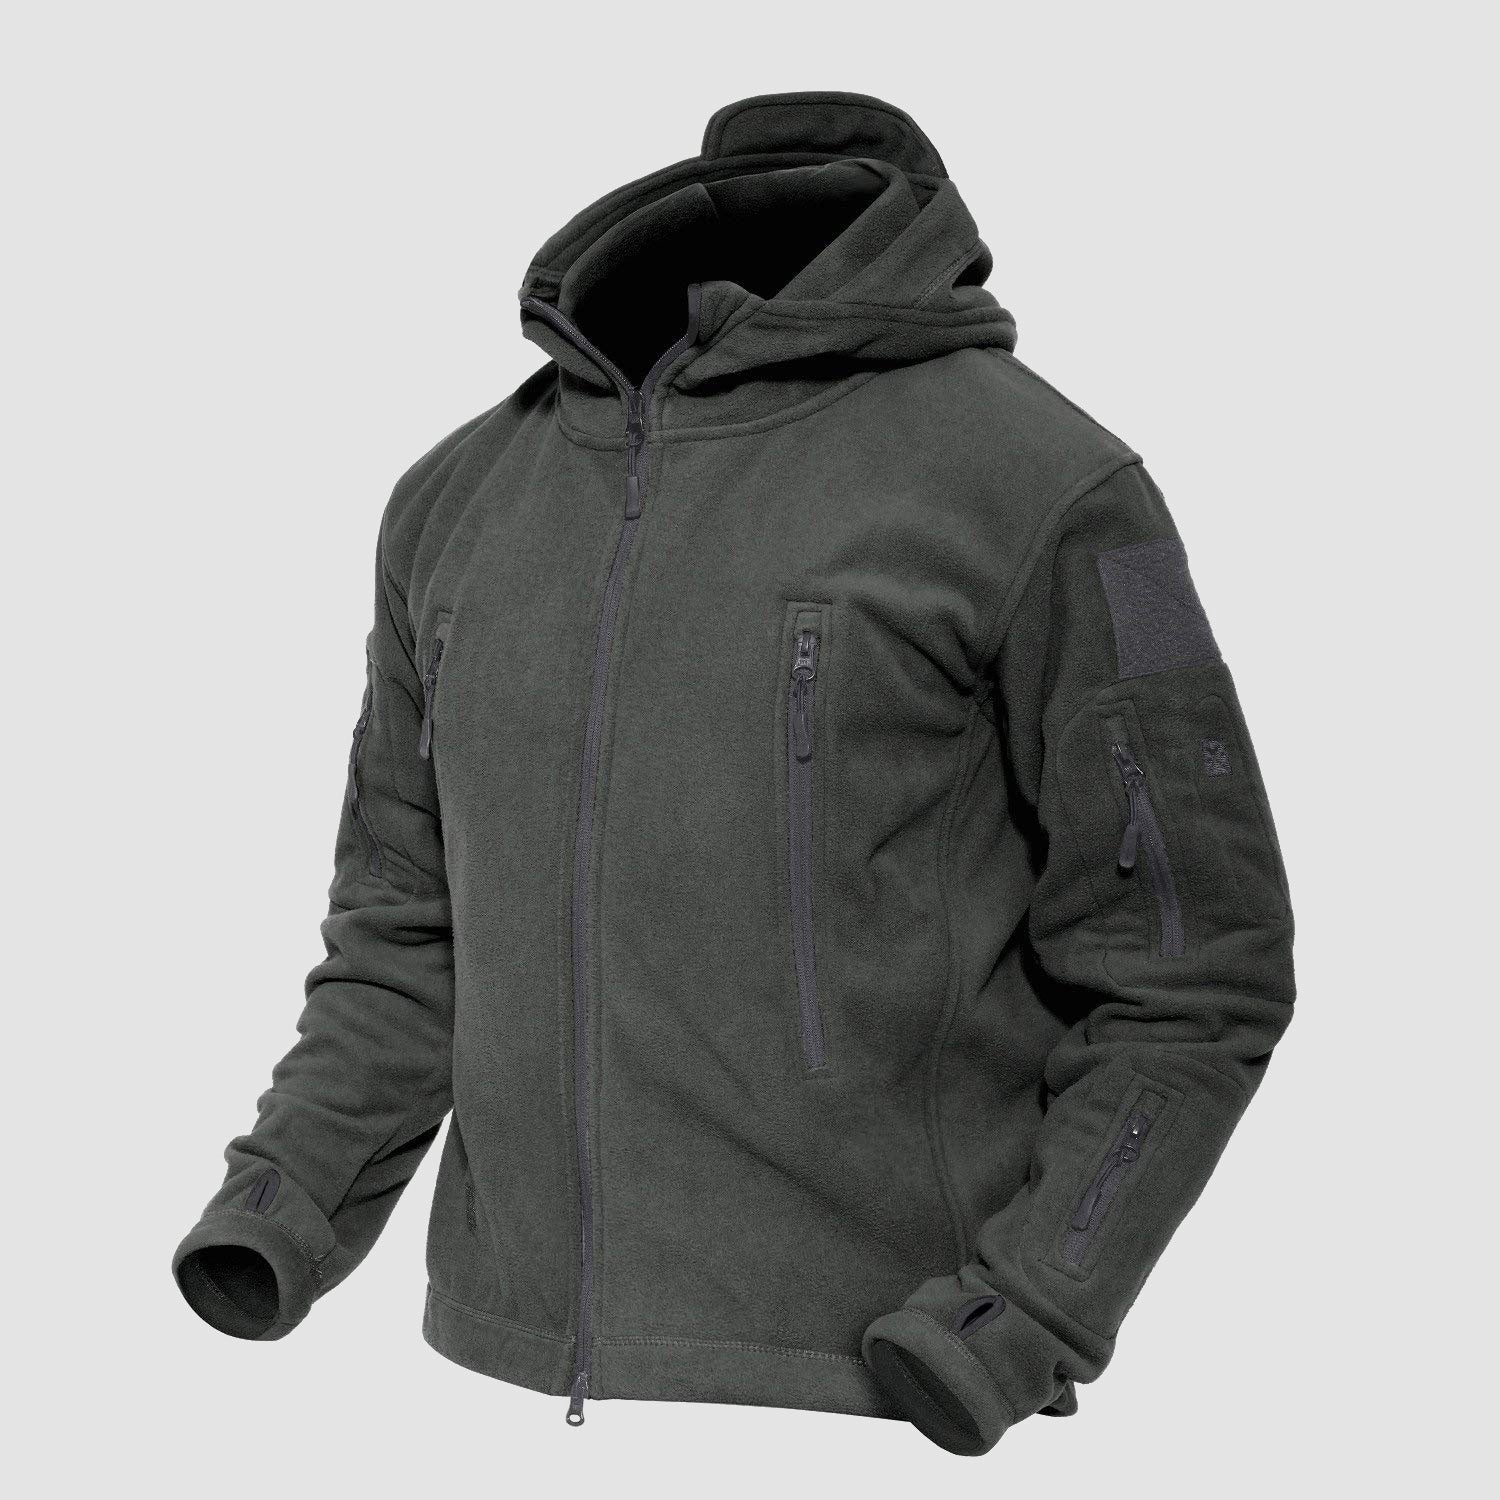 Men's Military Tactical Hooded Jacket with 6 Zip-Pockets